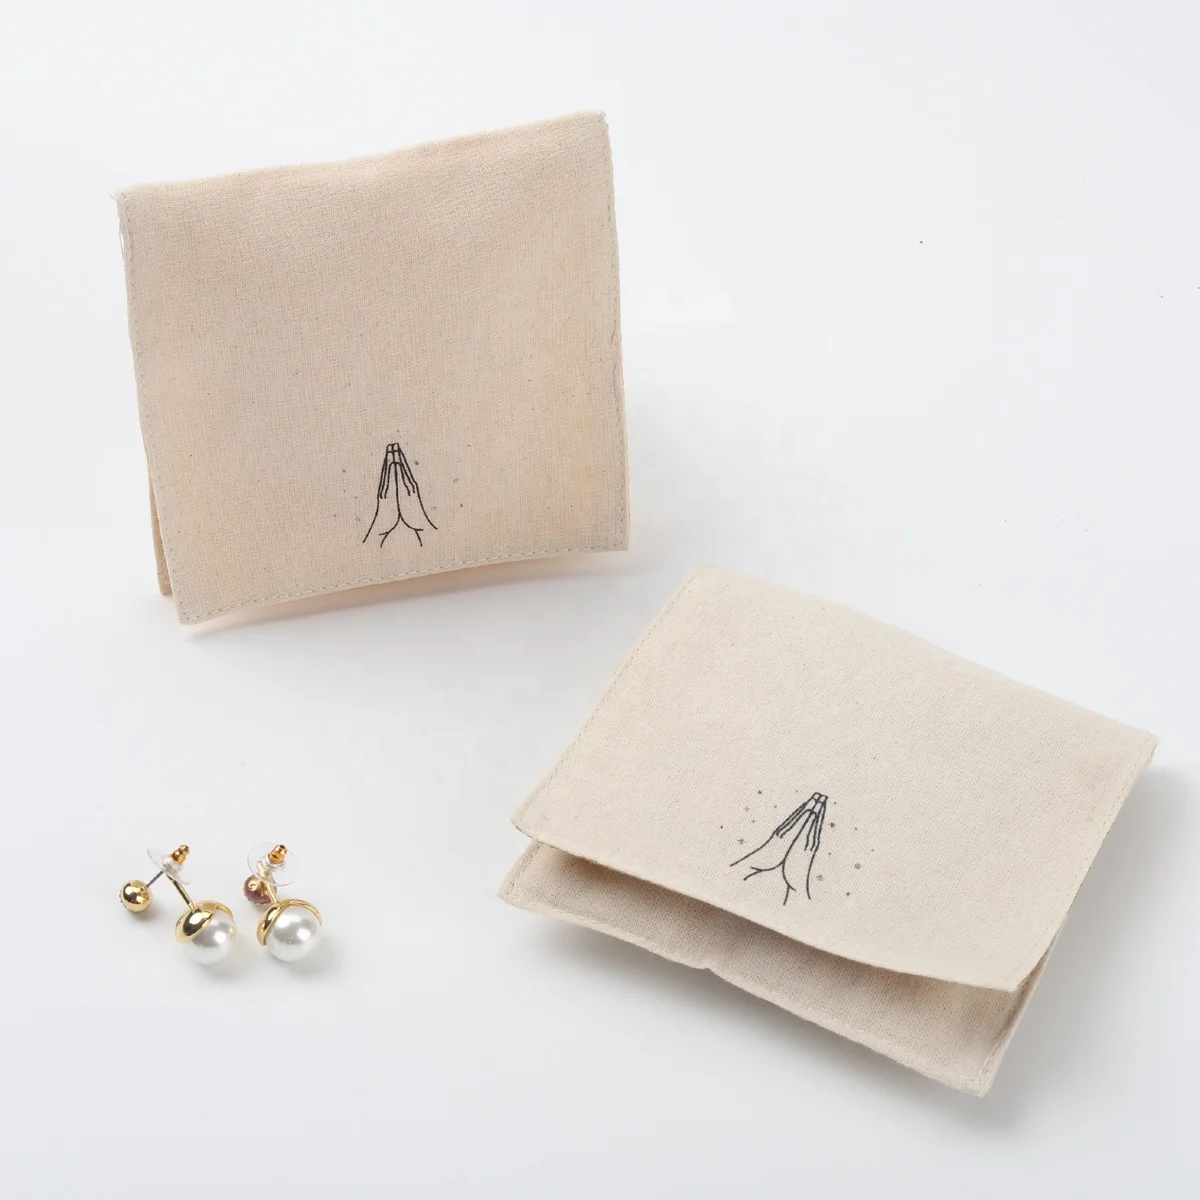 Small Envelope Gift Jewelry Packaging Bag Muslin Envelope Bracelet Necklace Jewelry Pouch